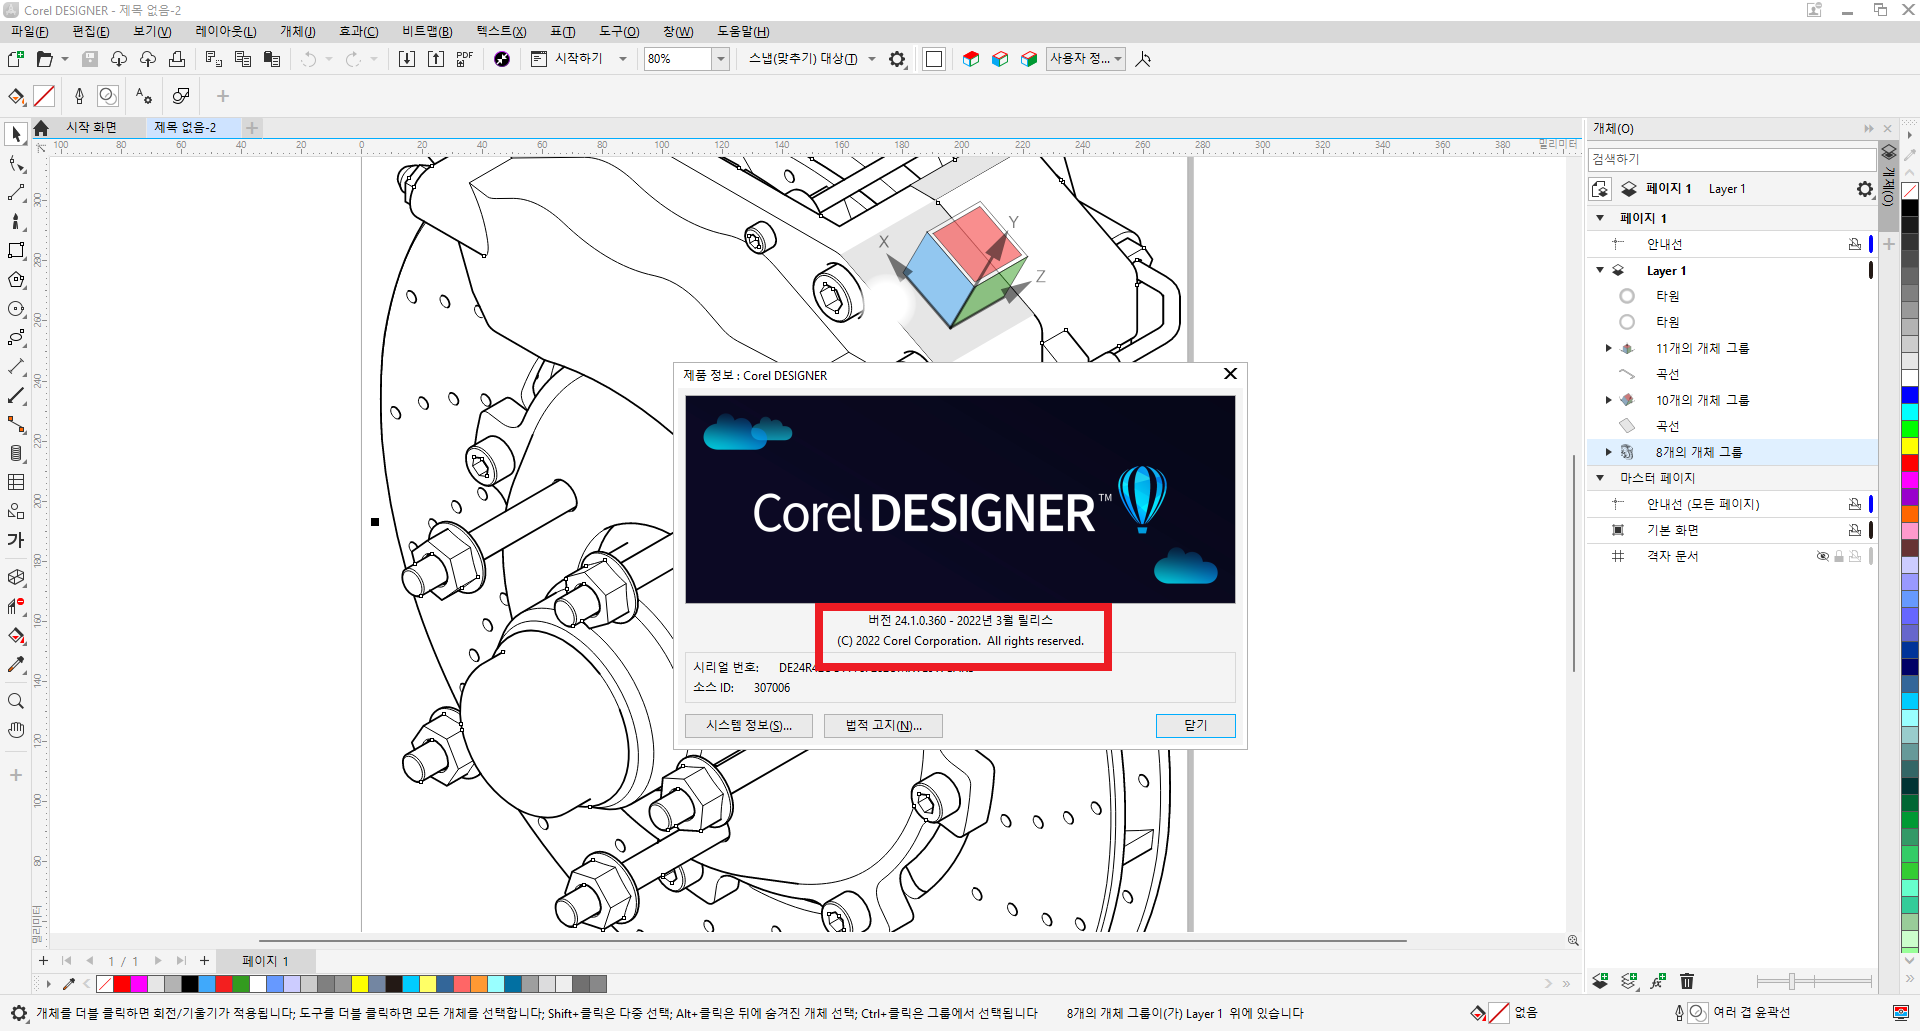 About_CorelDRAW_TS_01.png